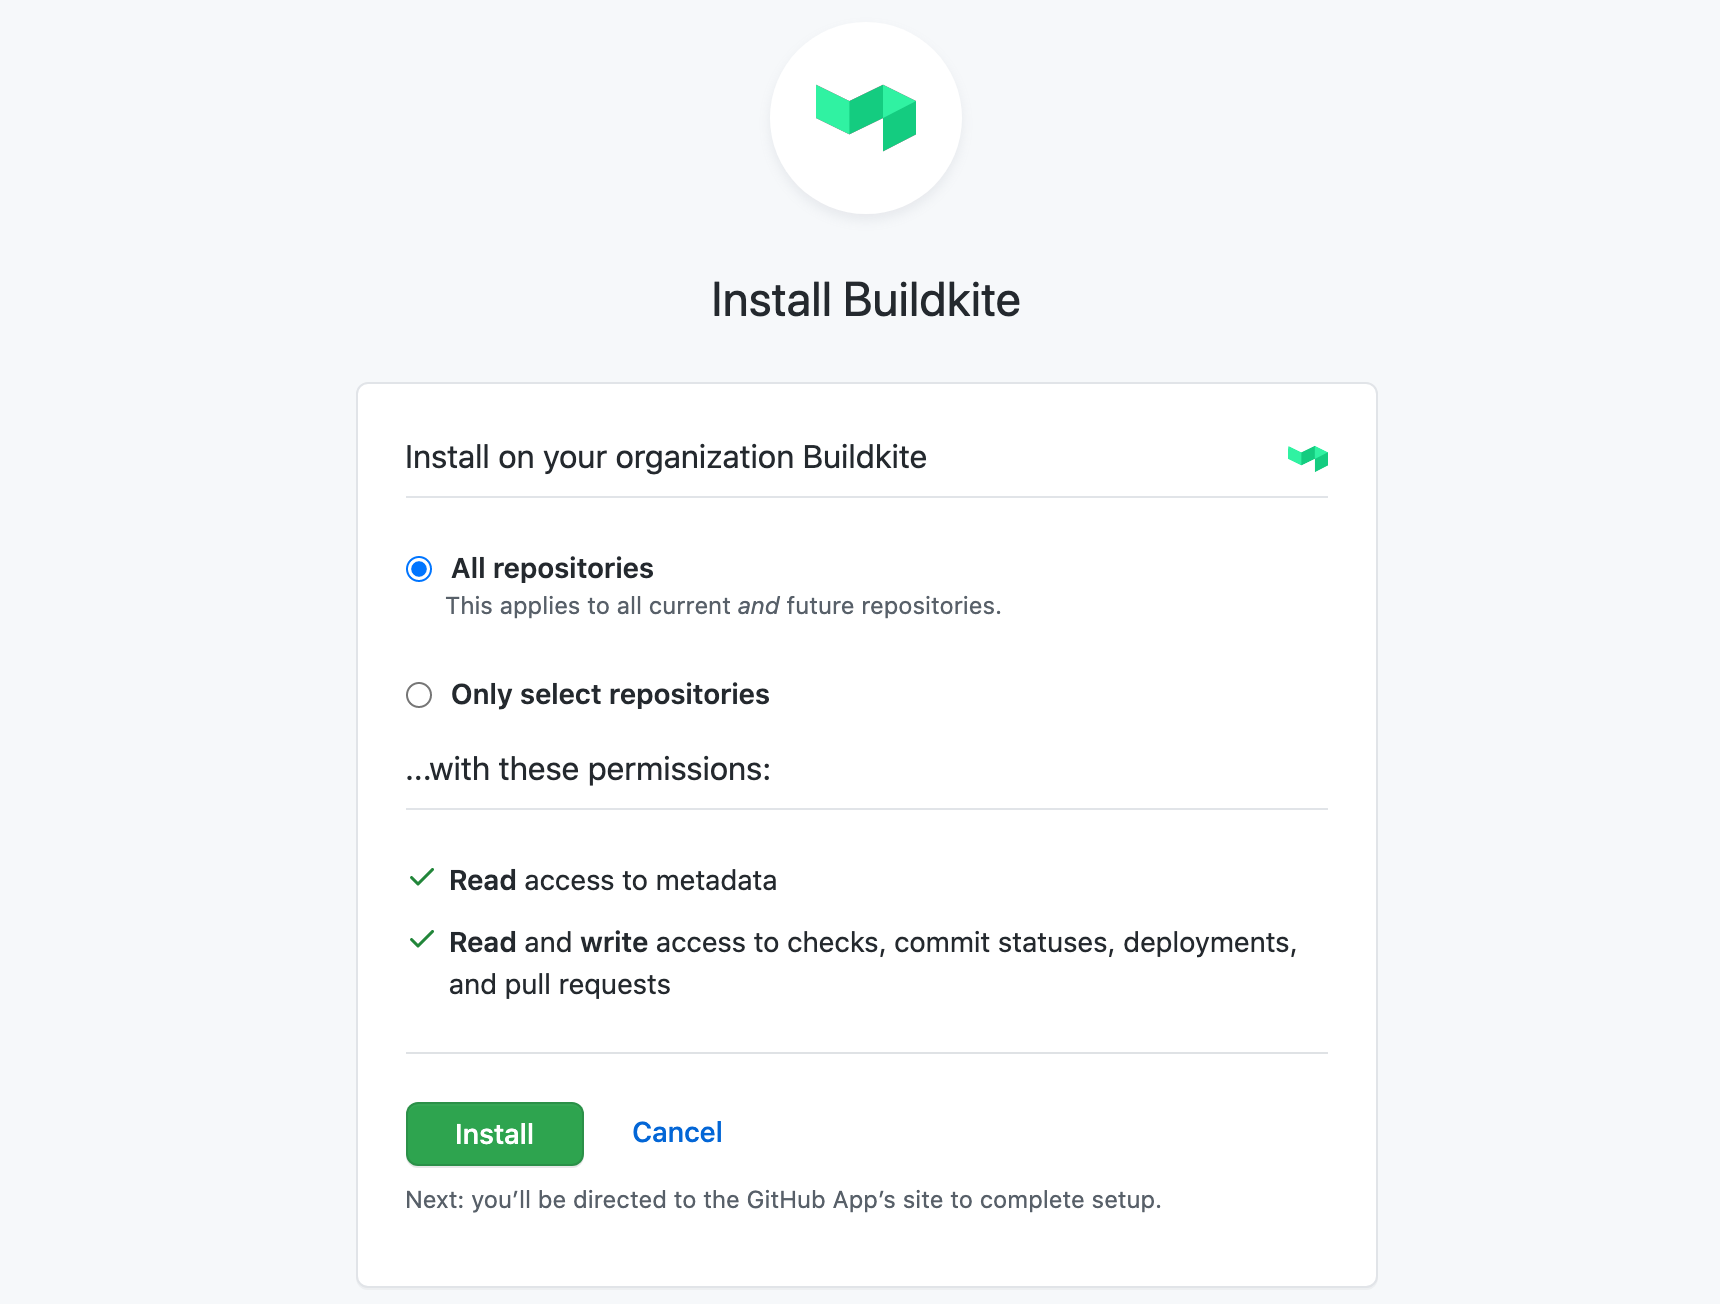 Installing the Buildkite GitHub App with permissions visibility and repository controls